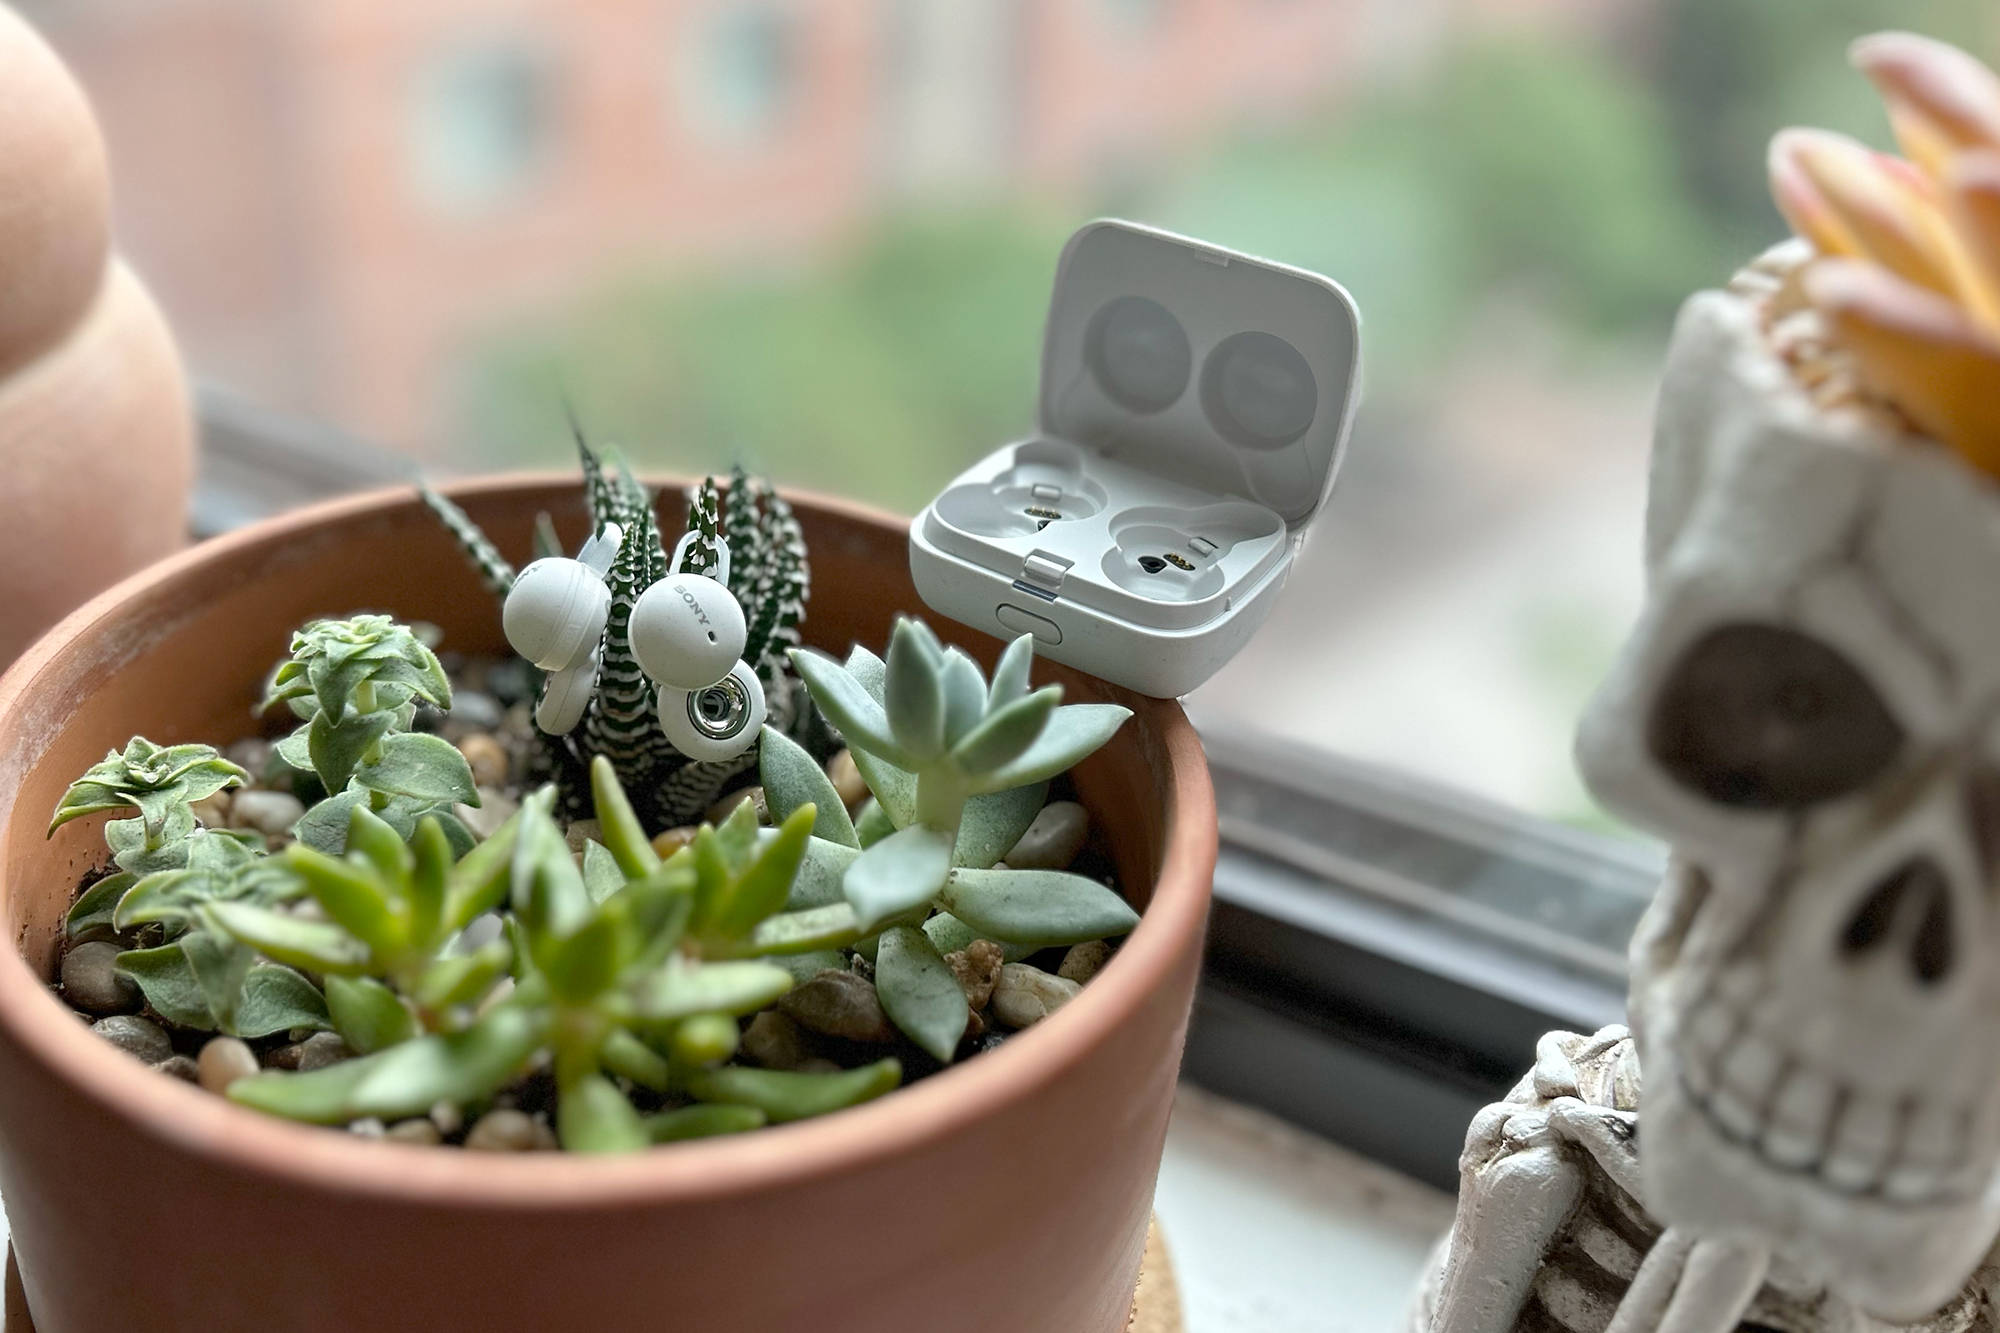 Sony LinkBuds situational awareness city running earbuds in a succulents planter